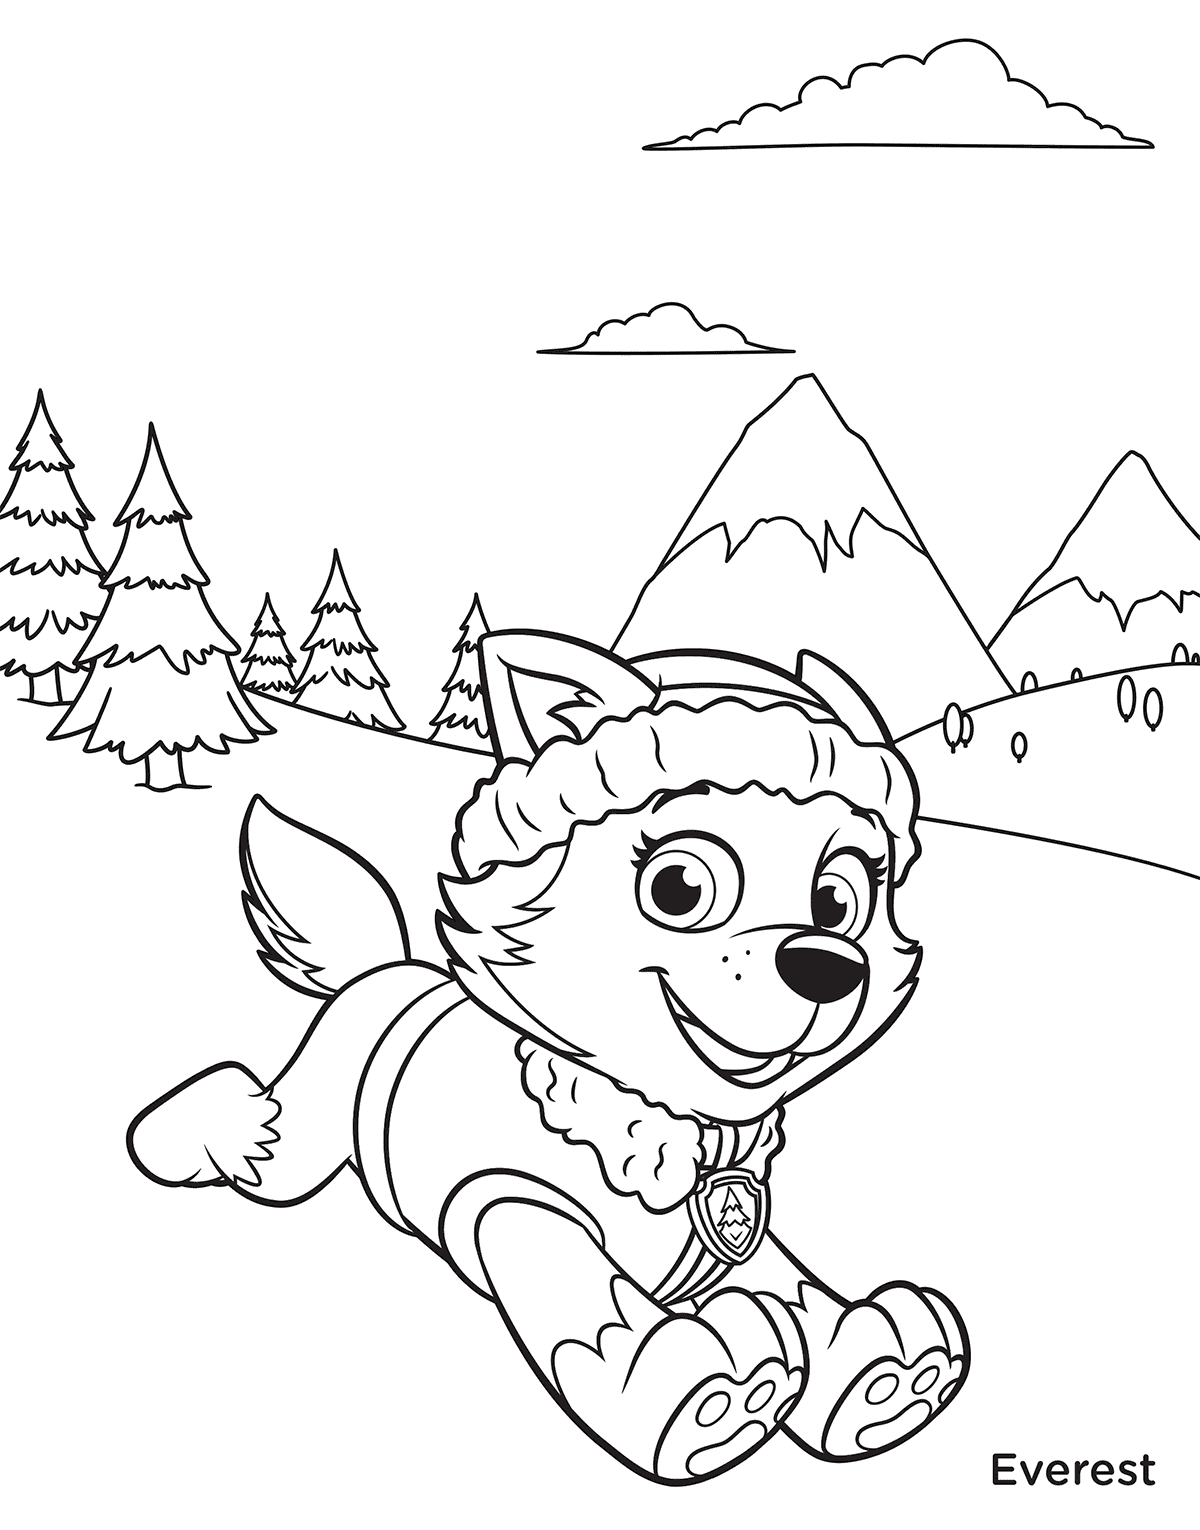 PAW Patrol Everest In Mountains Coloring Page